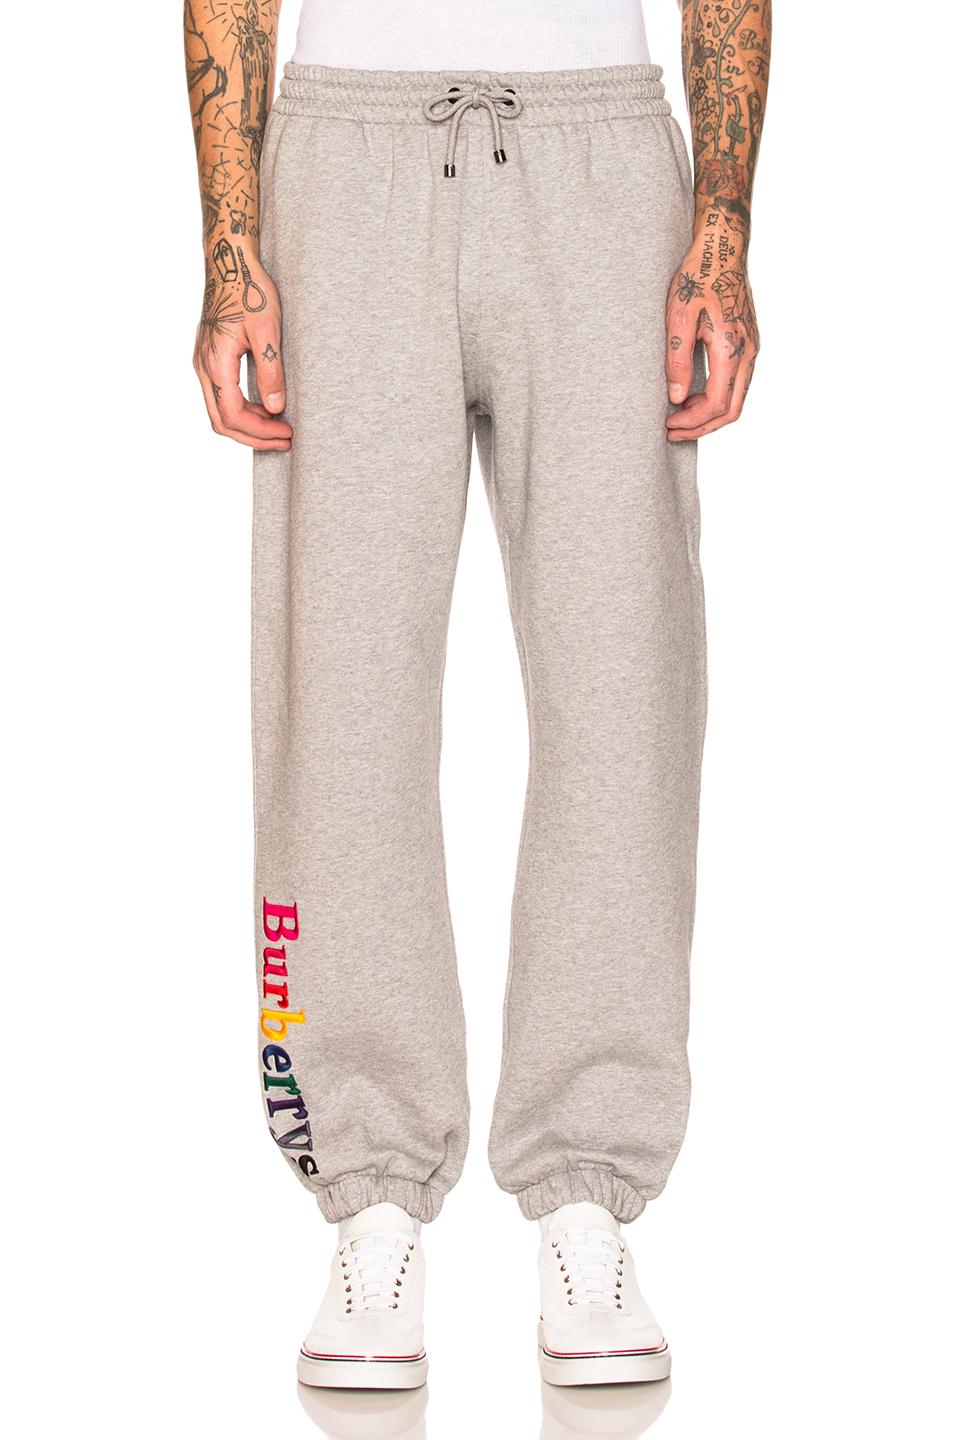 Burberry Cotton Sweatpants in Grey (Gray) - Lyst